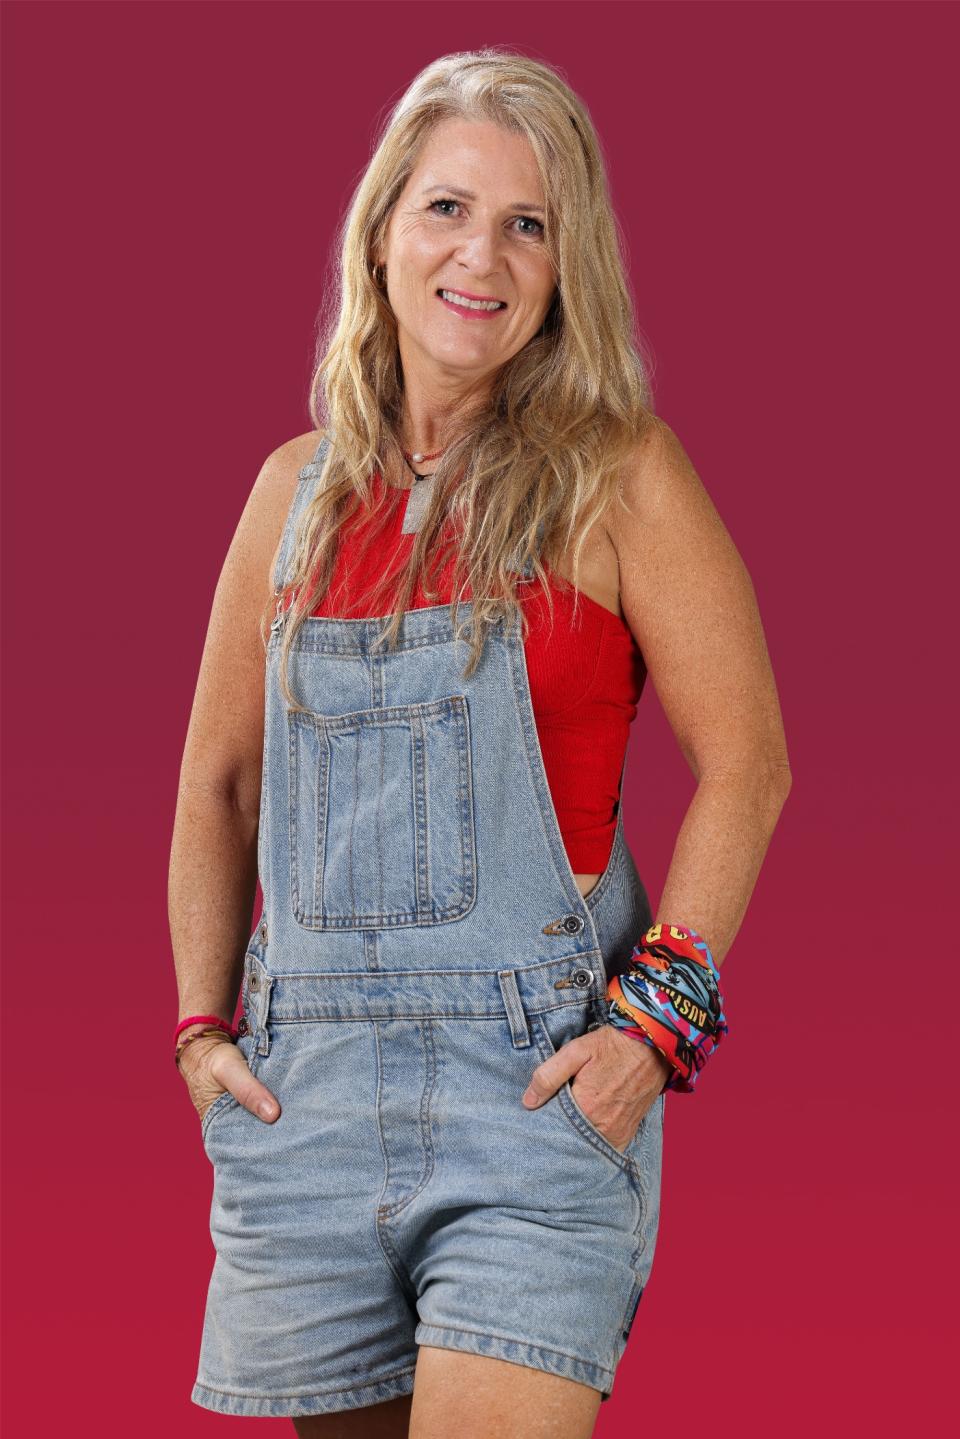 Kelli wears denim overalls and smiles at the camera.